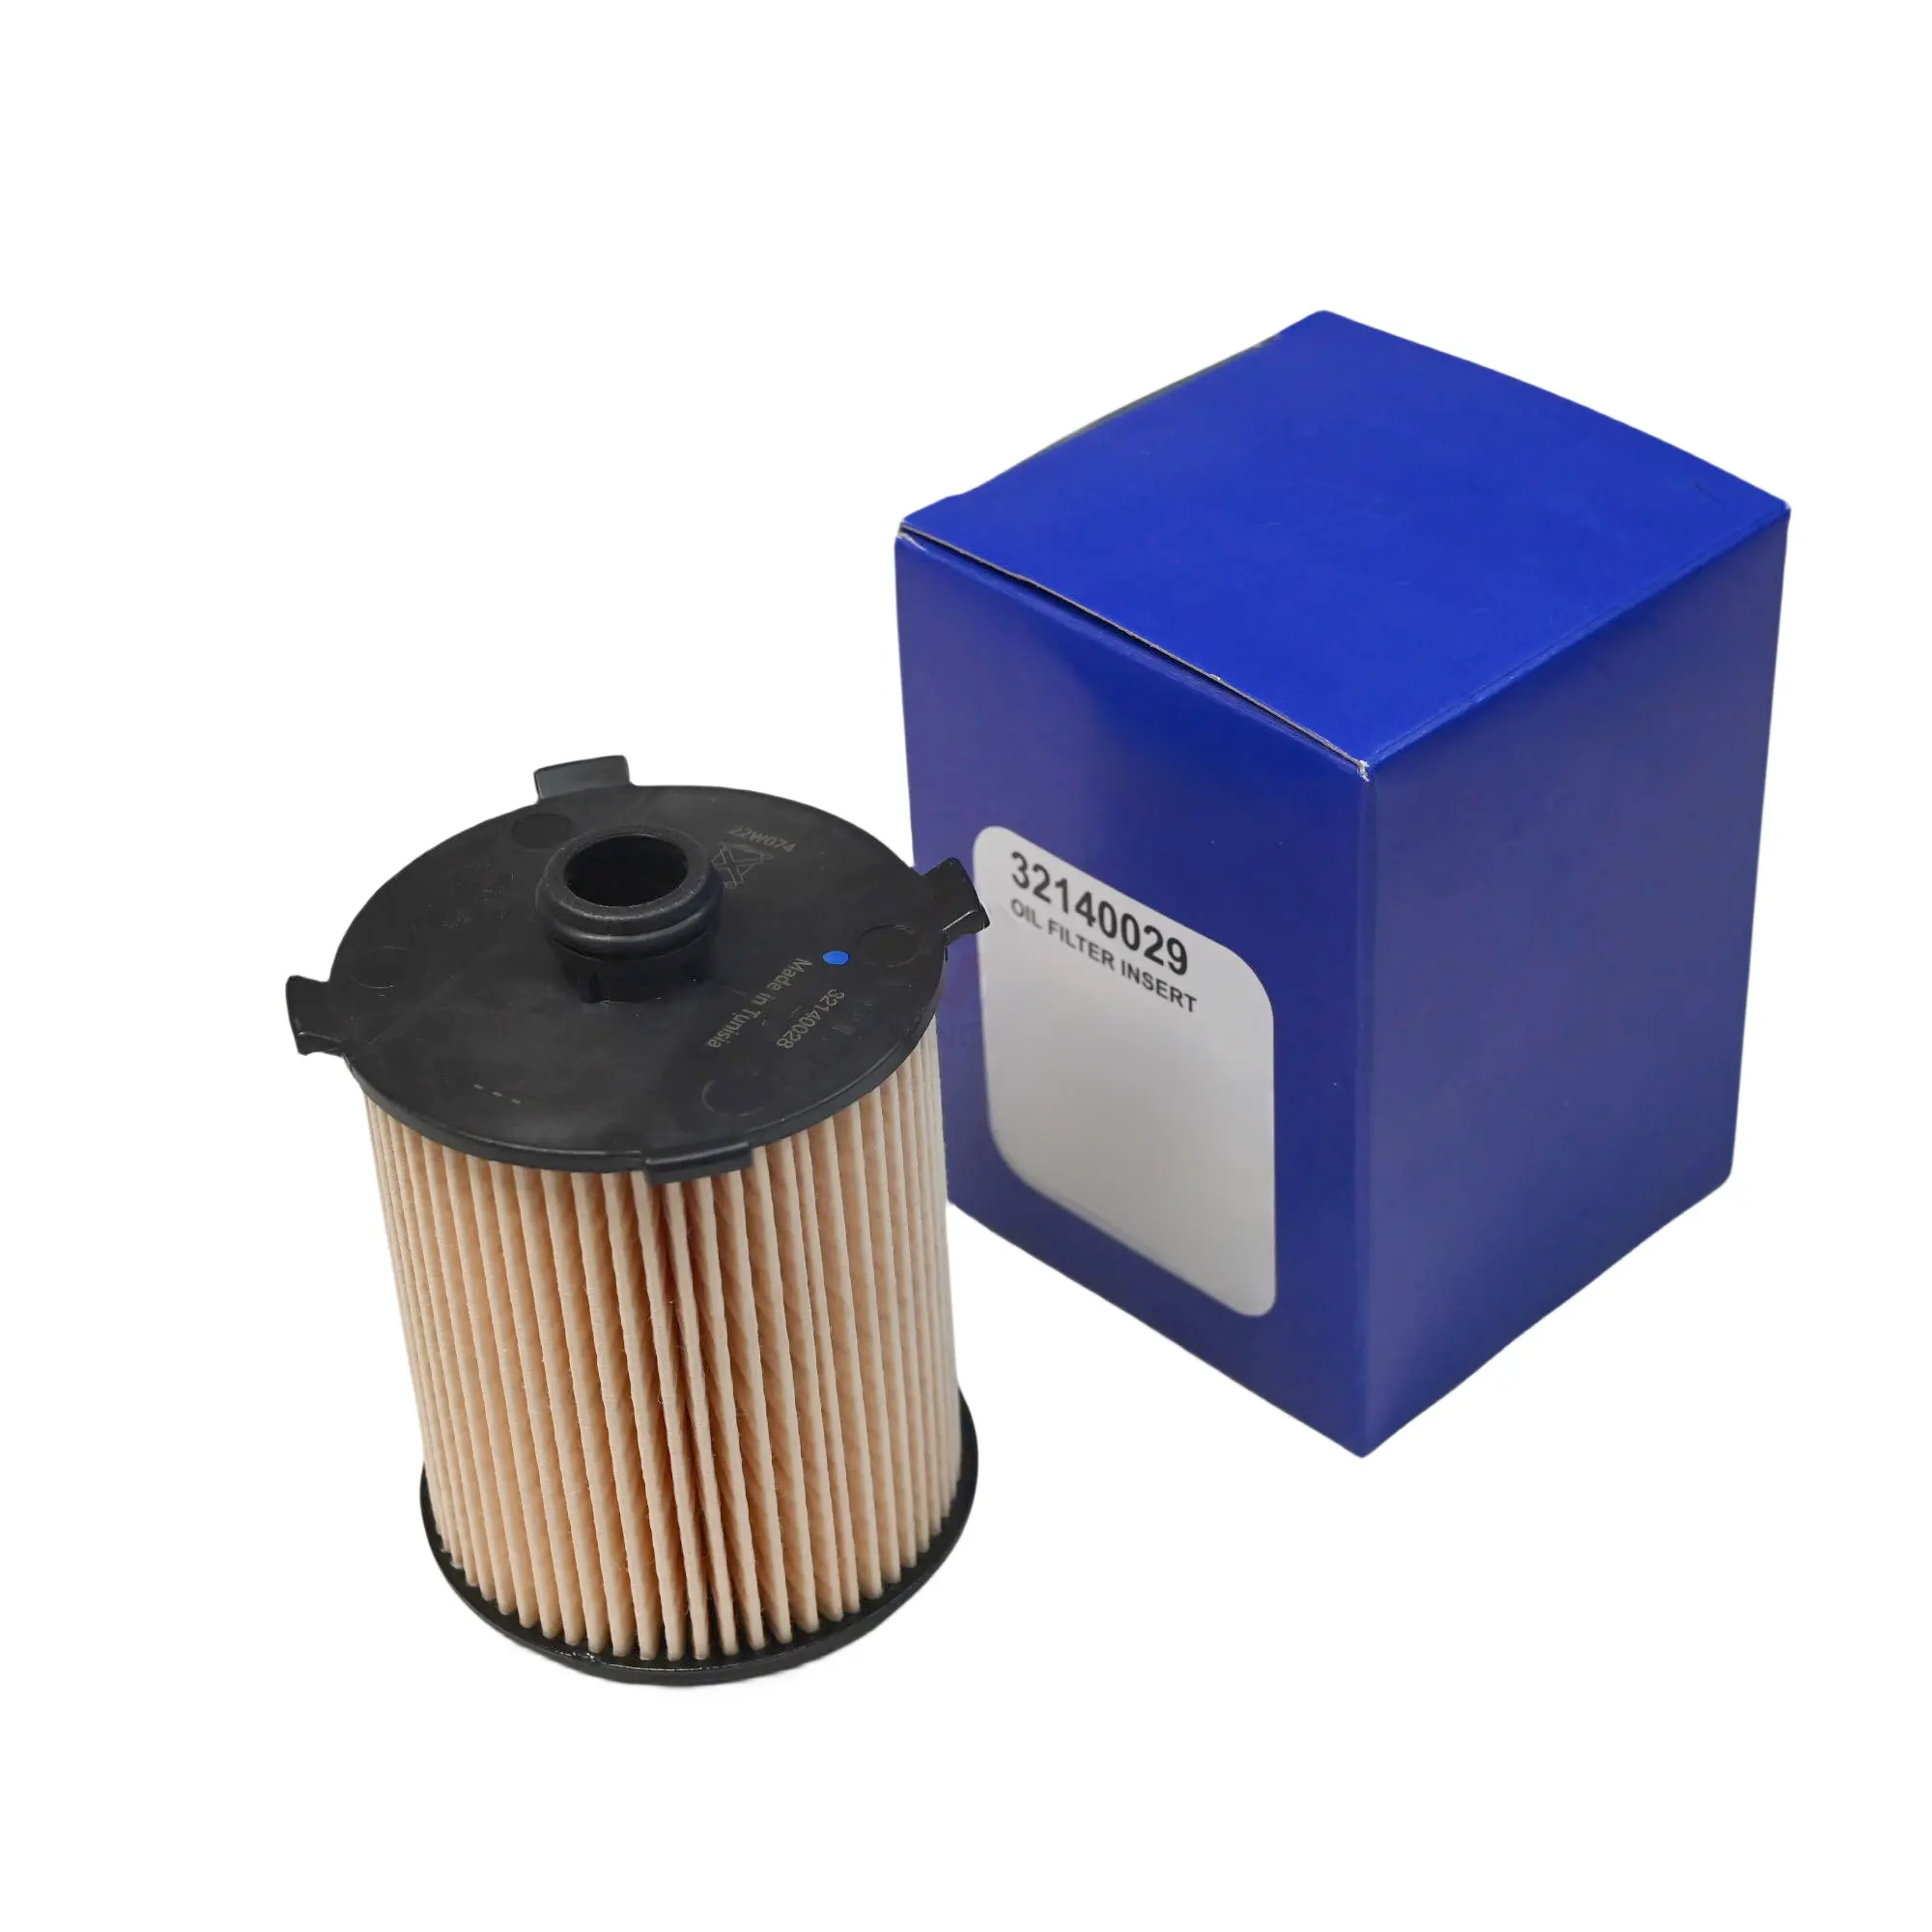 Oil filters china factory wholesale 32140029 21372212 car oil filters for volvo cars